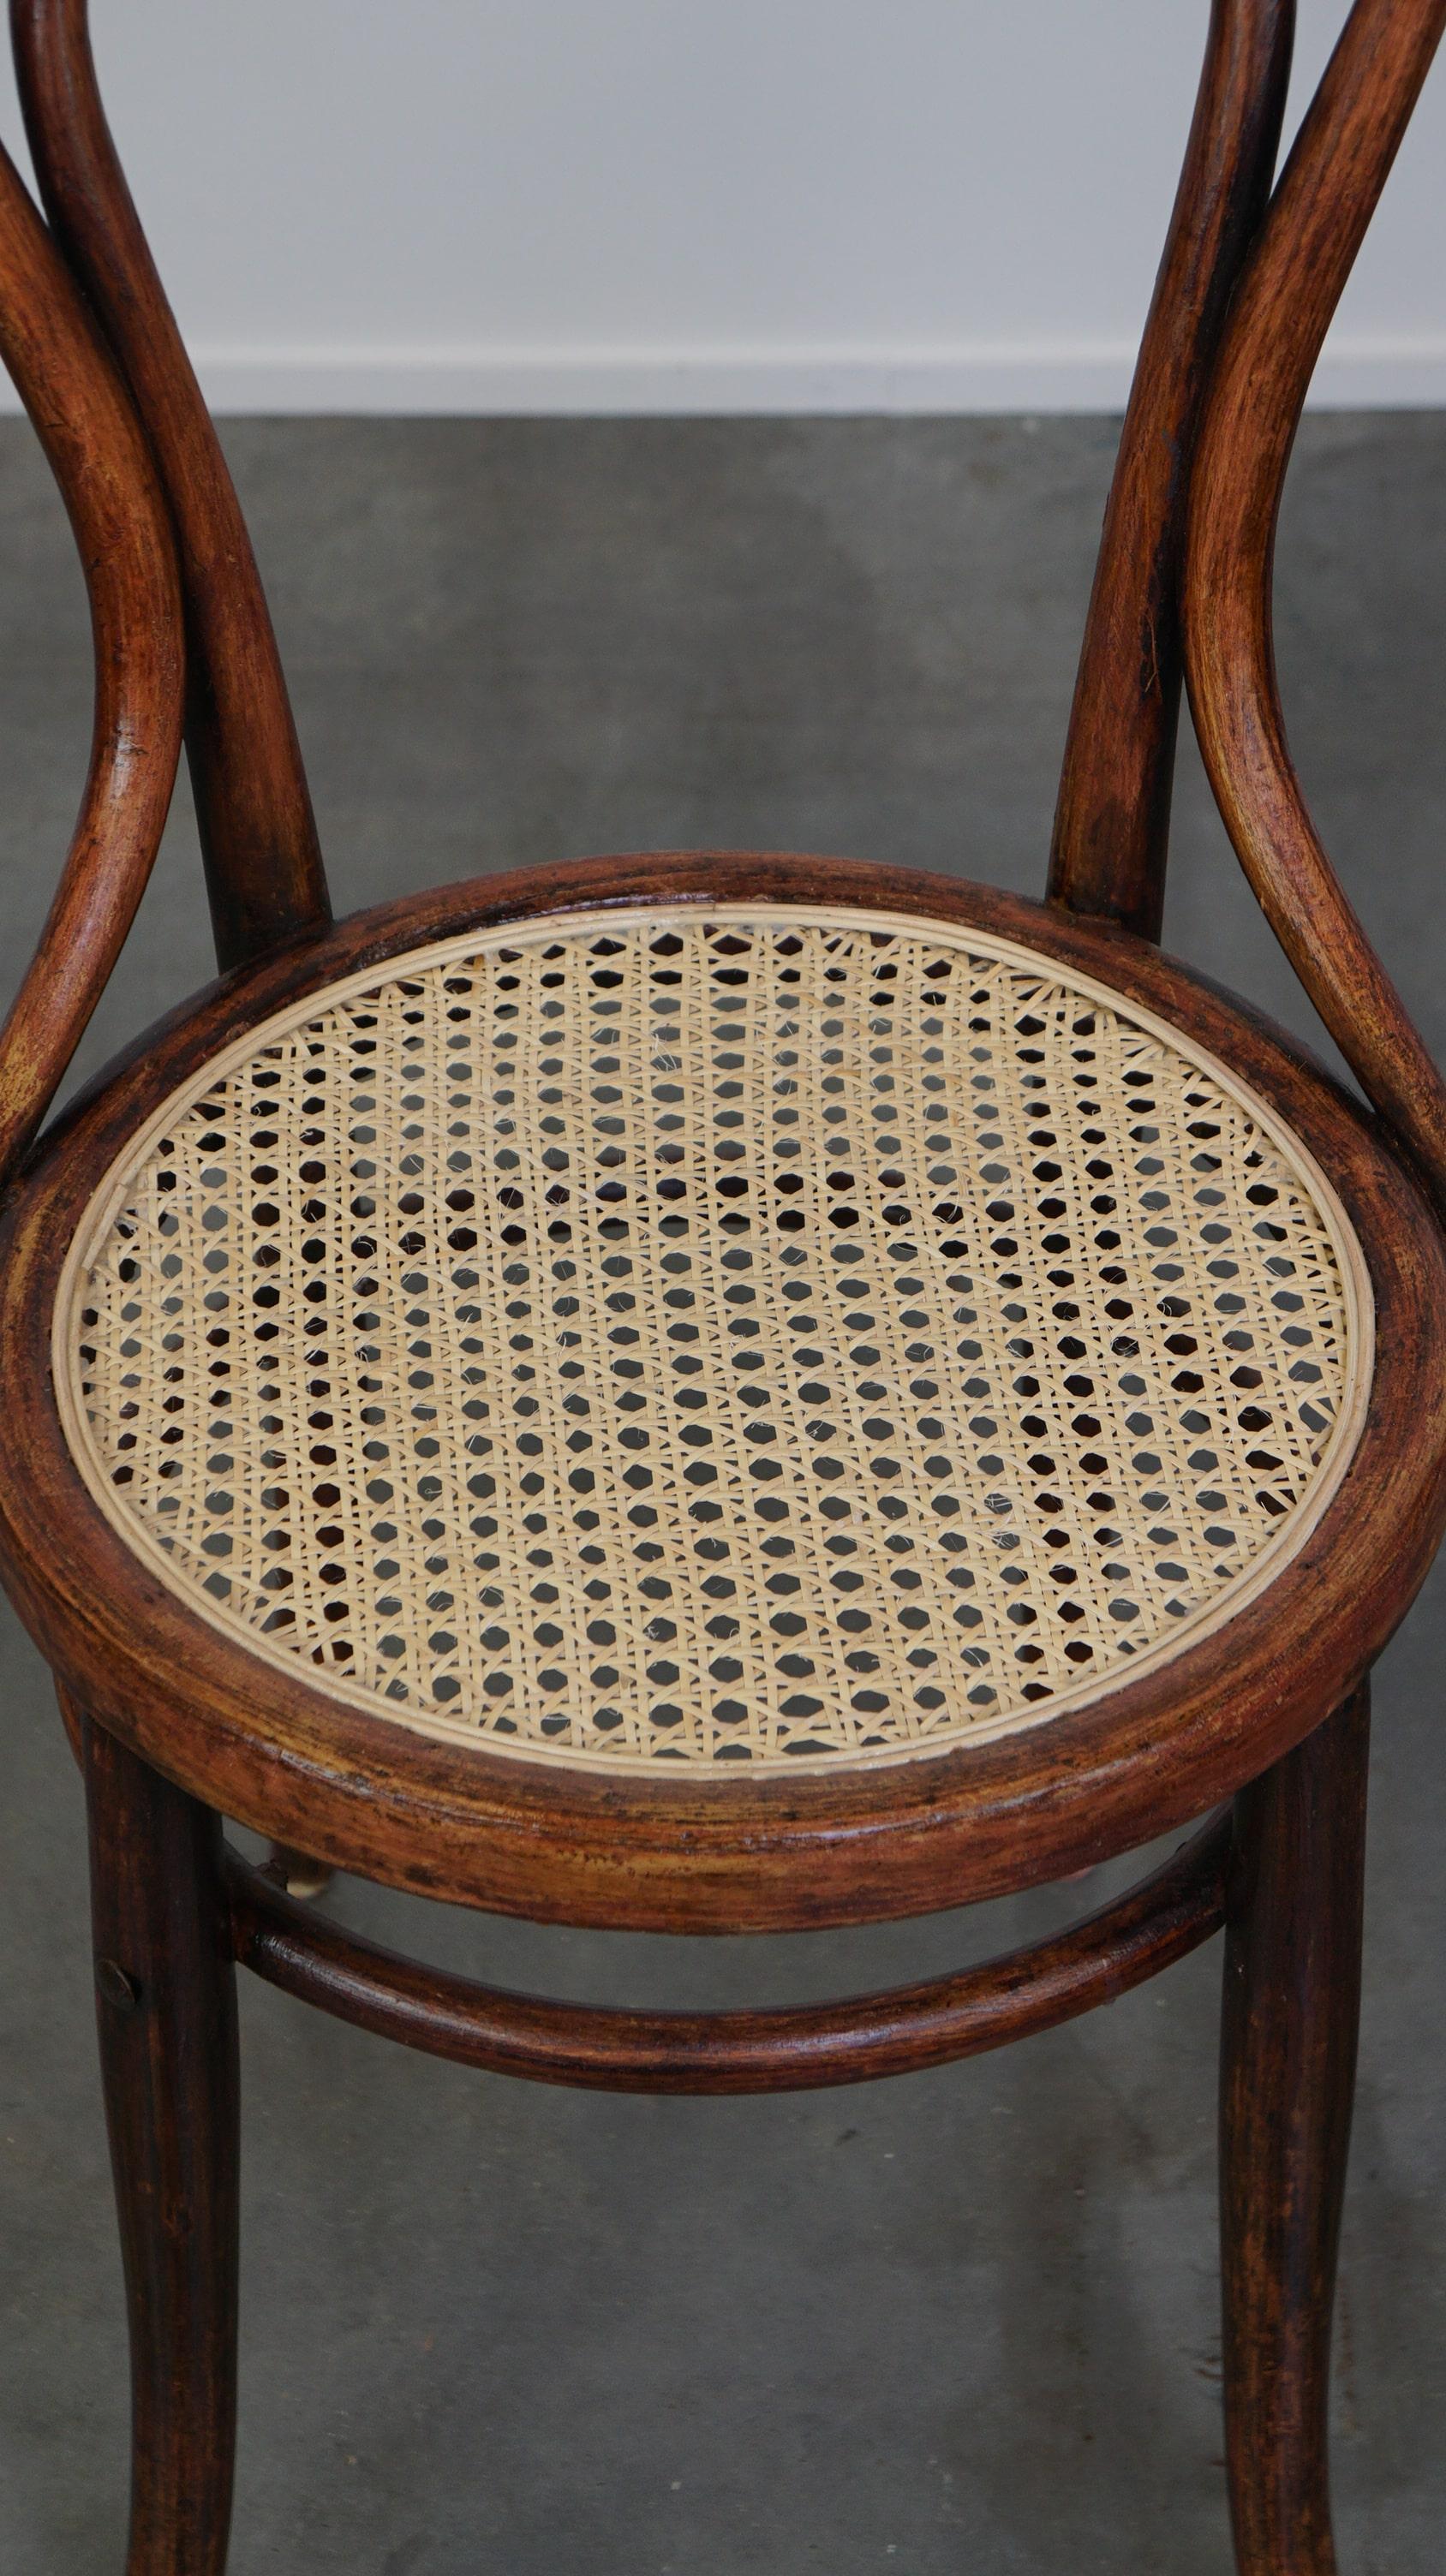 Wicker Original antique bentwood Thonet bistro chair model no. 14 with a new matte seat For Sale